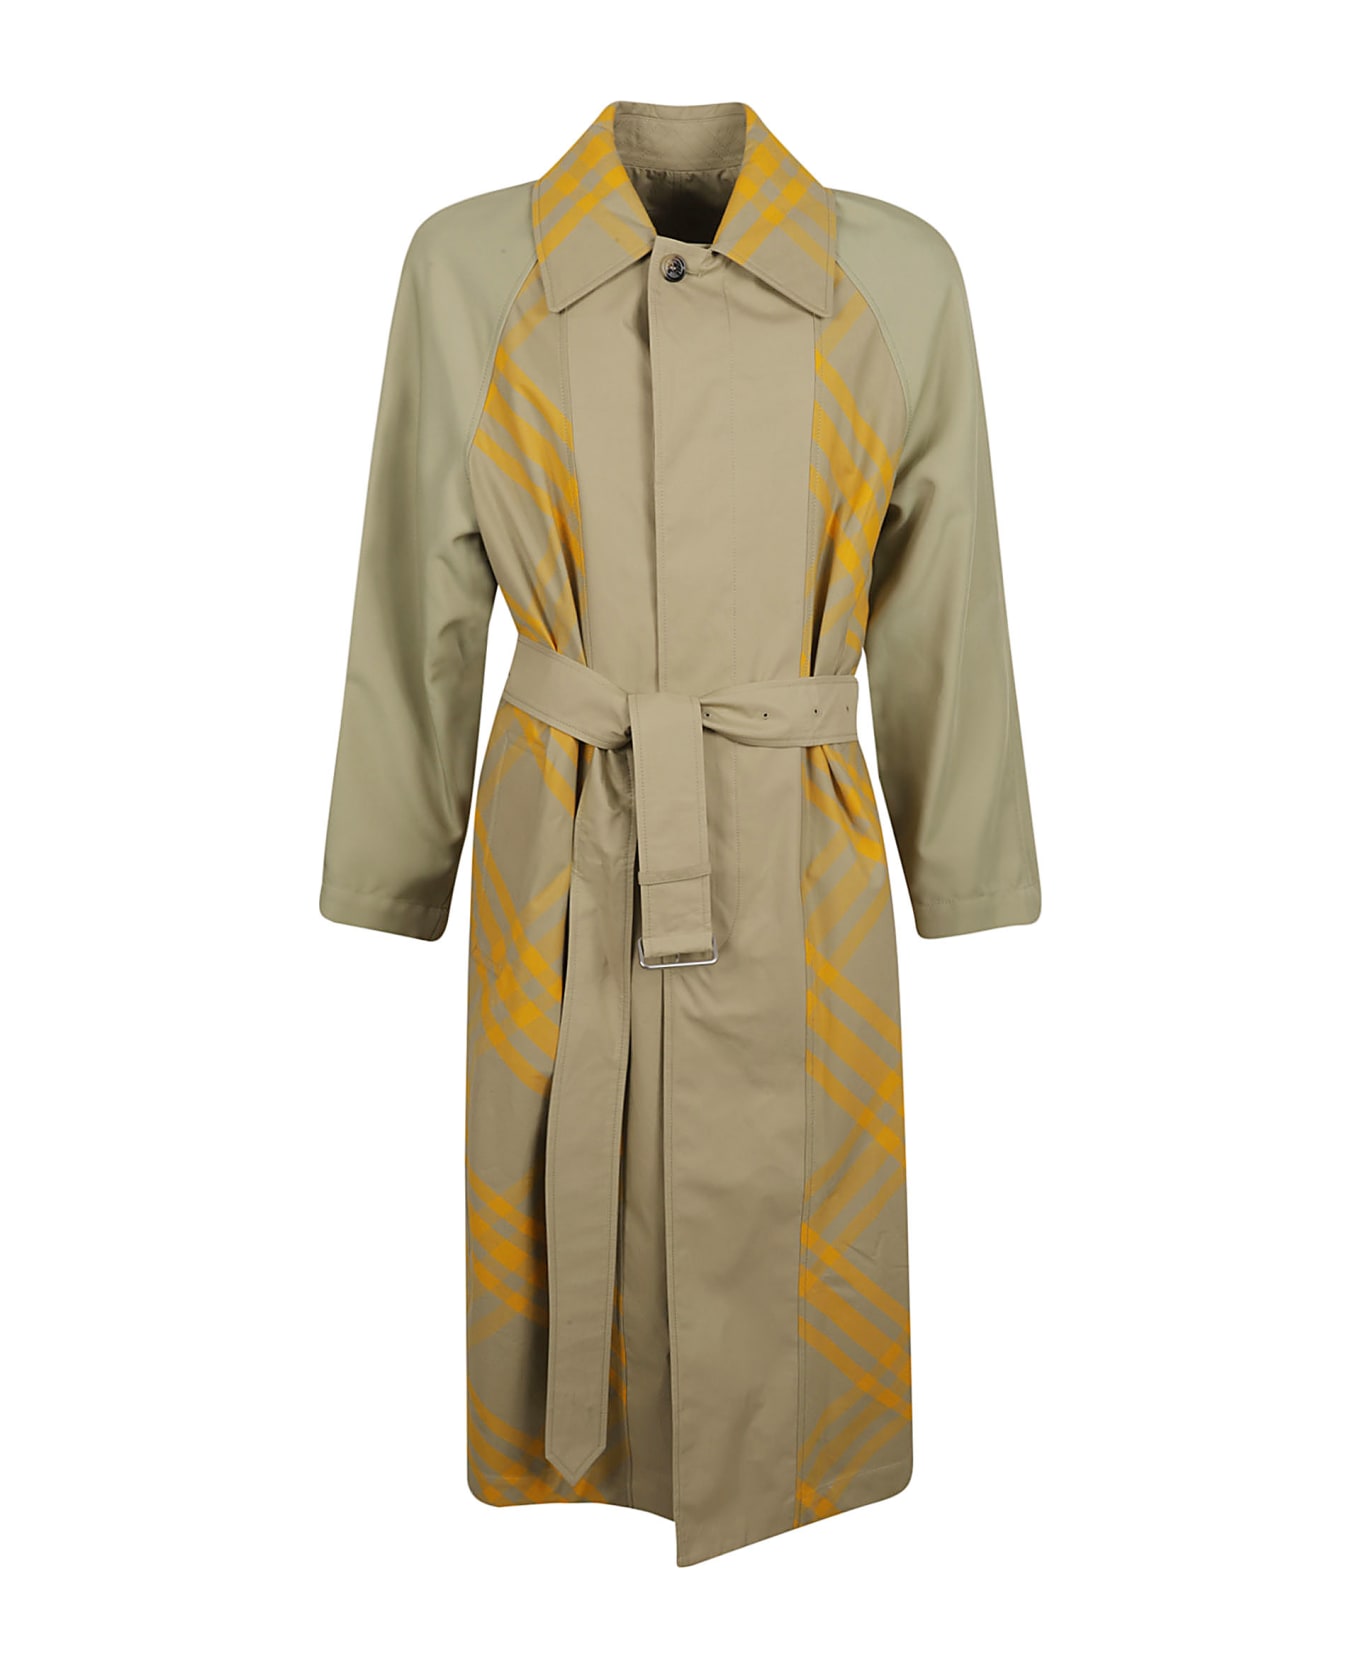 Burberry Printed Long Belted Coat - Beige